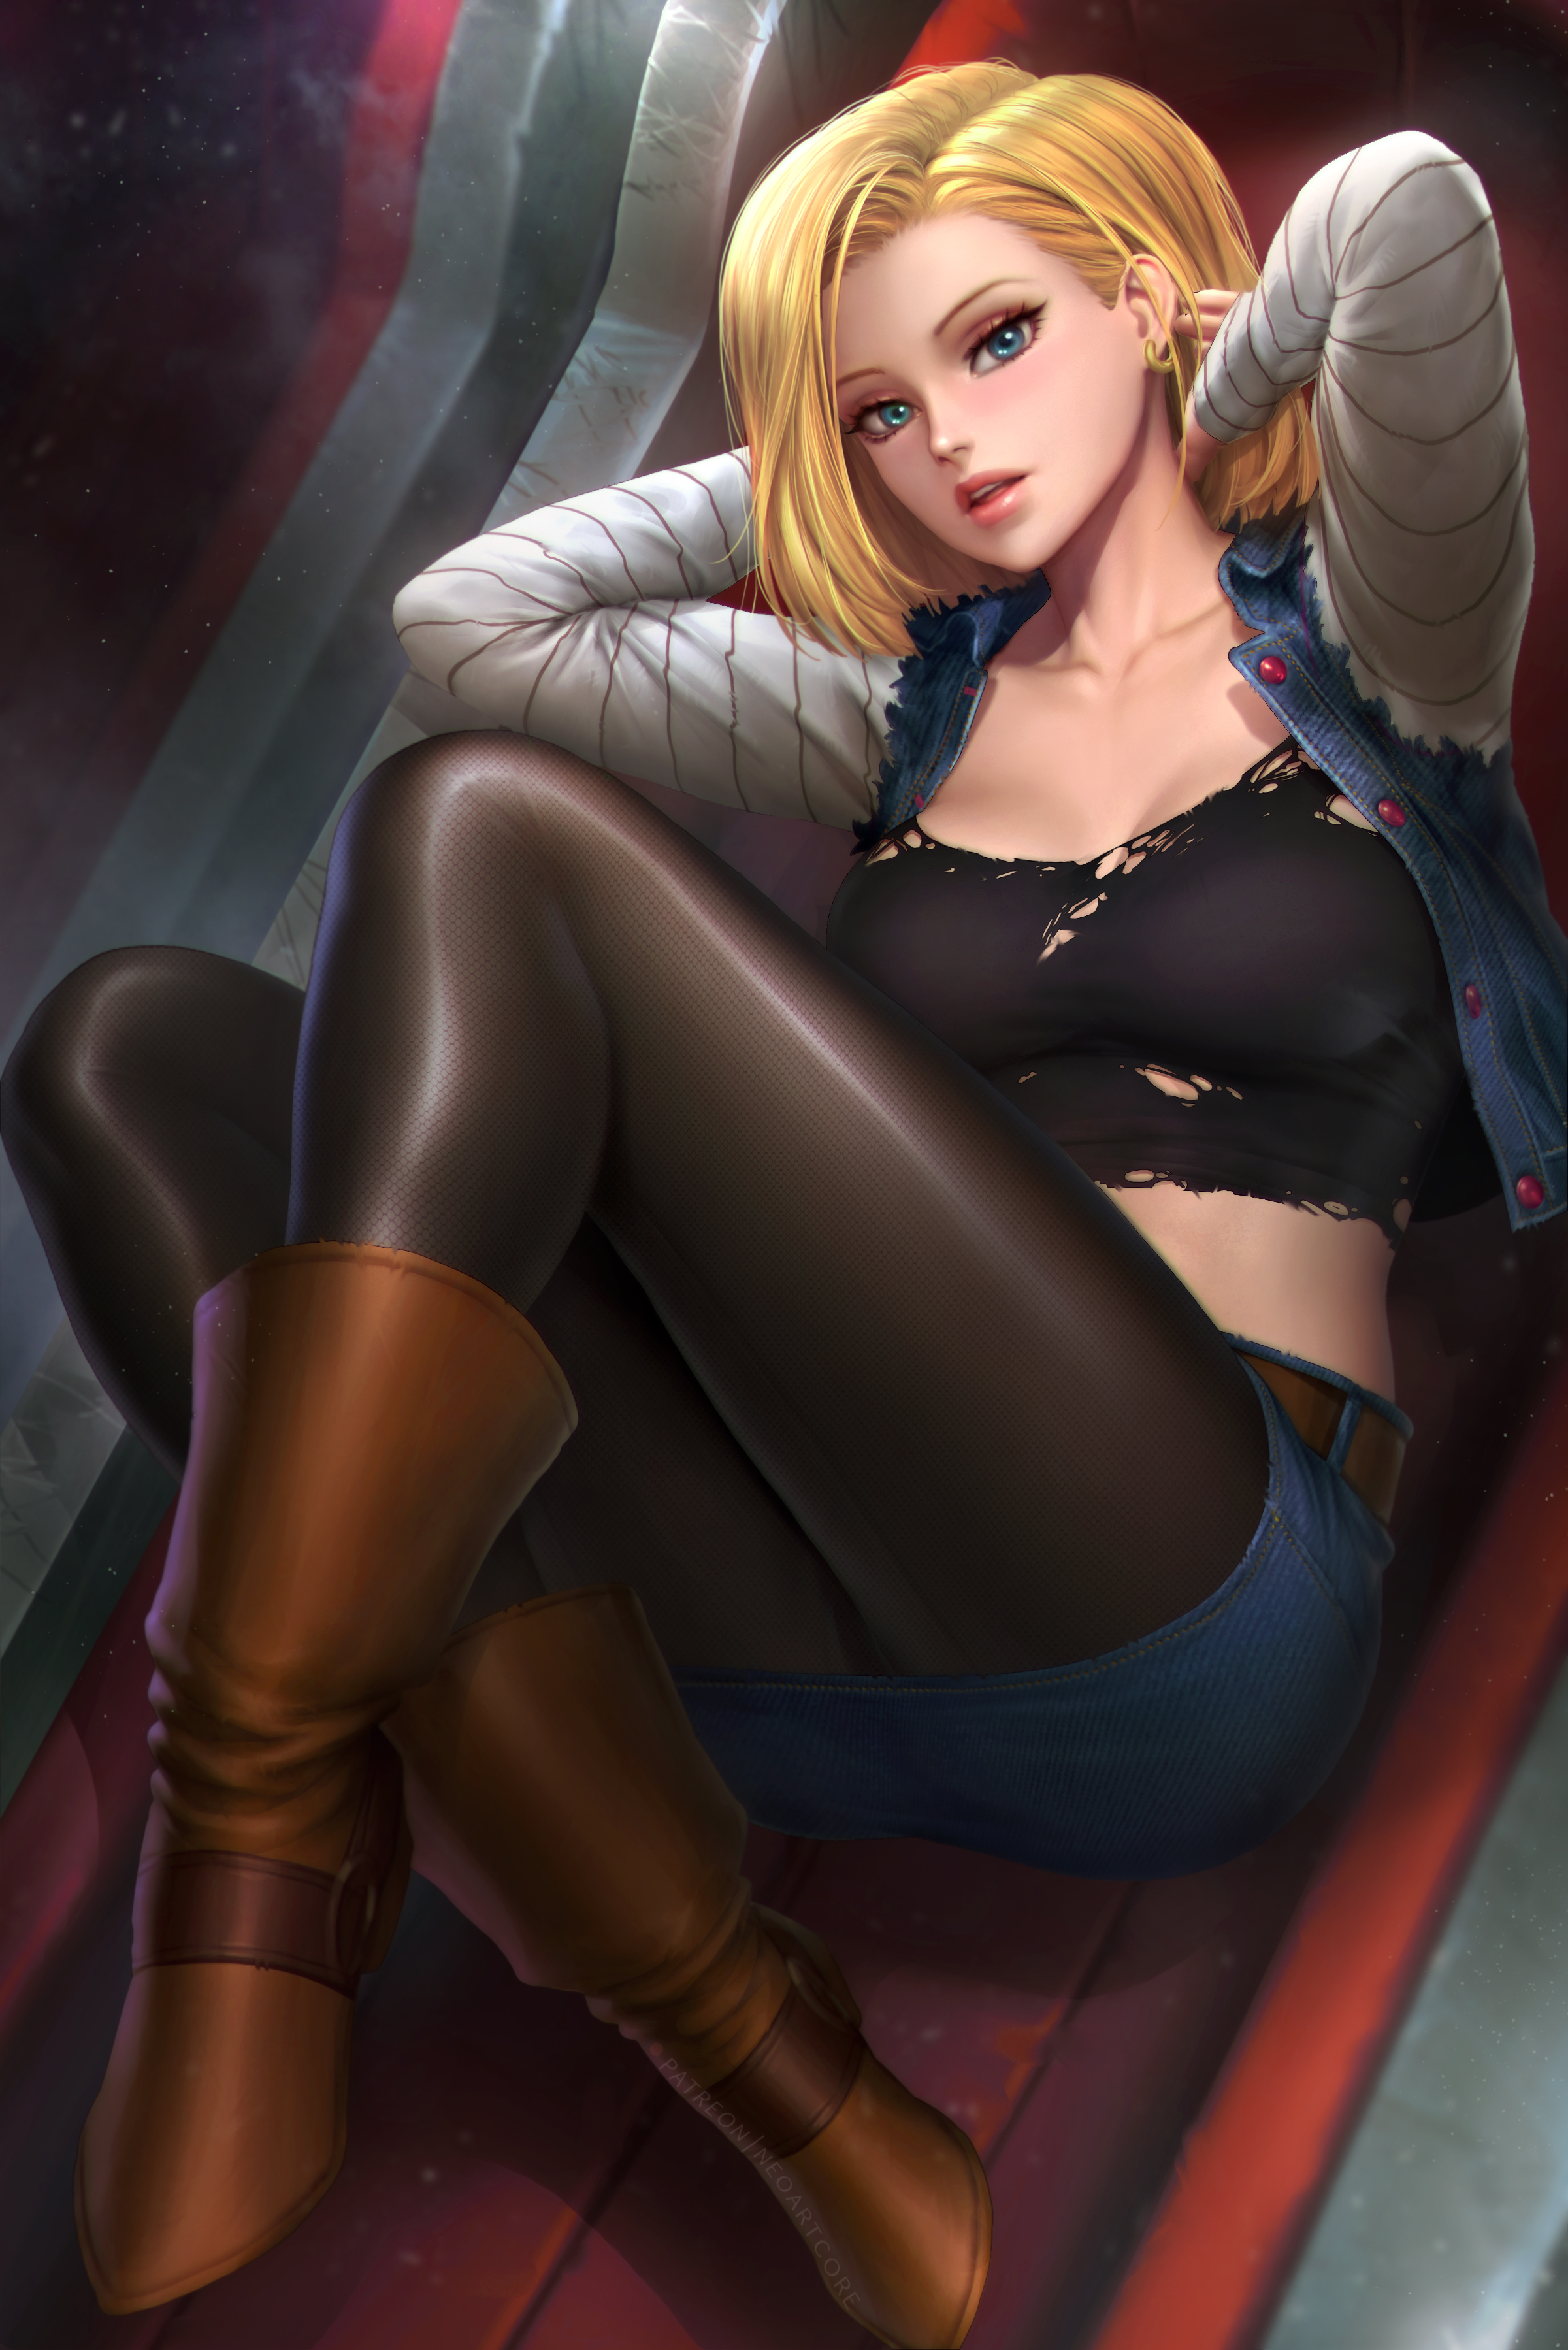 Android 18 Dragon Ball Z Anime Anime Girls Women Blonde Looking At Viewer Blue Eyes Parted Lips Jack 2400x3597